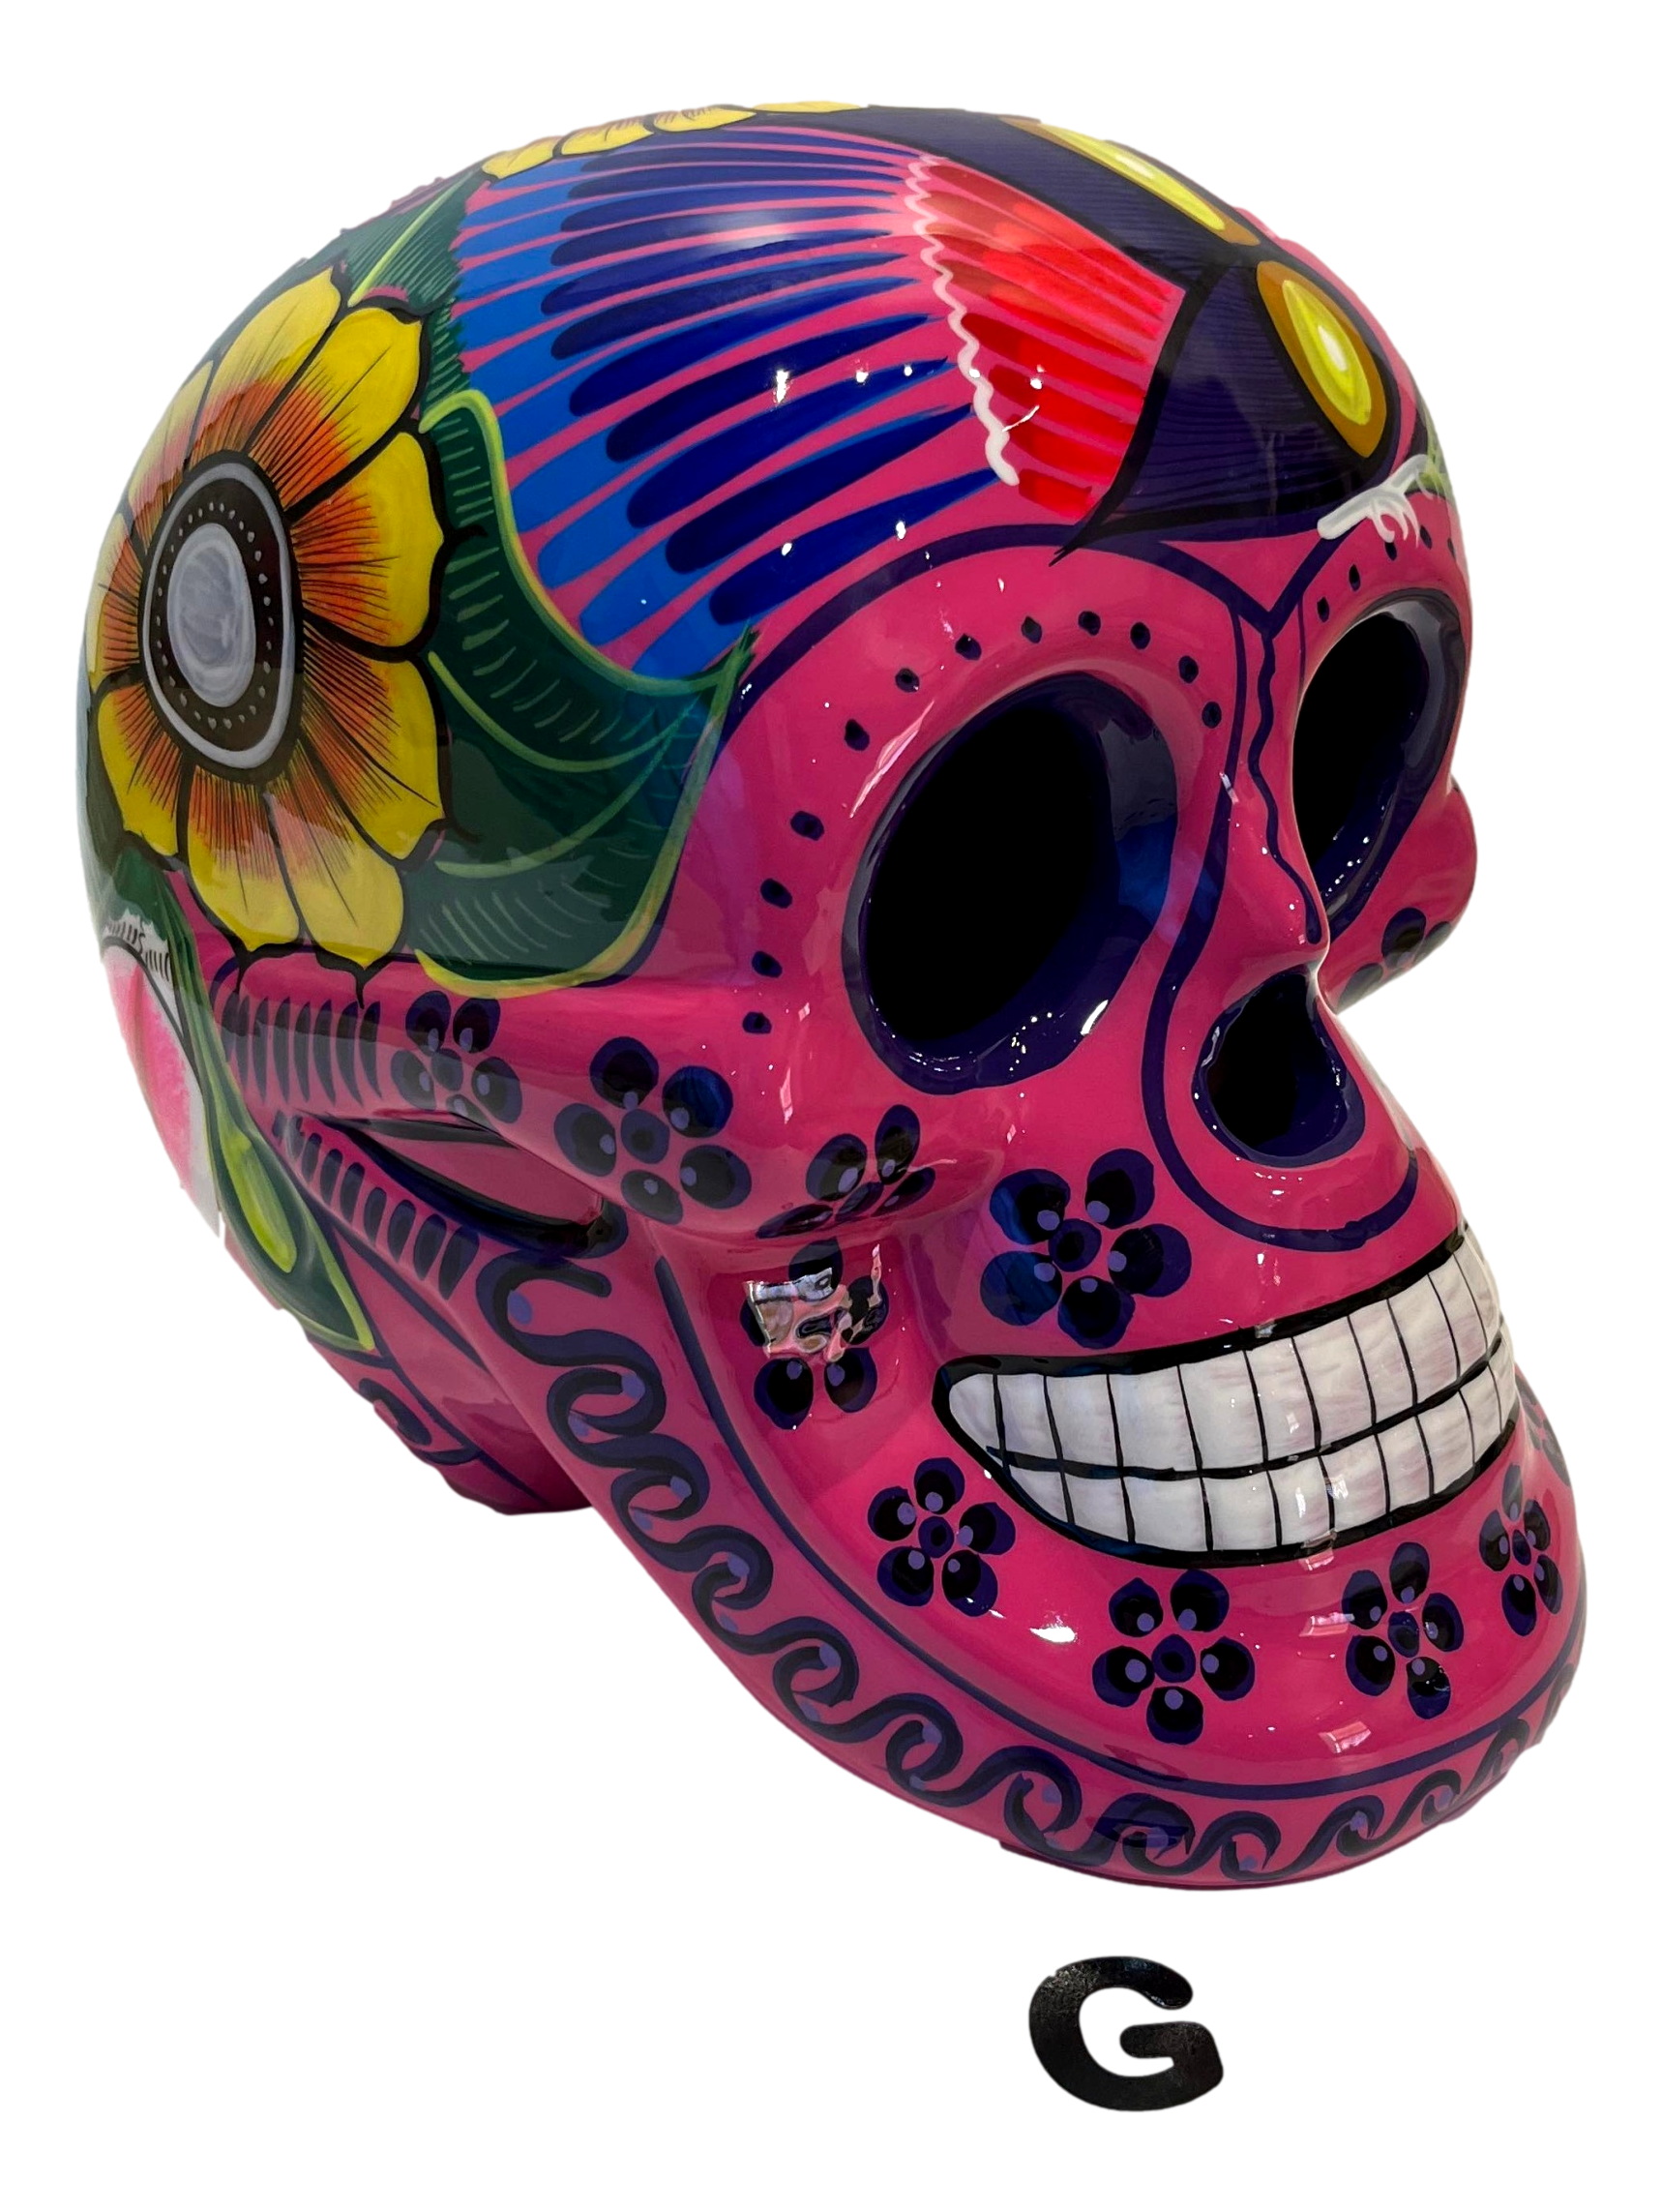 Skull Day Of The Dead XL Ceramic Handcrafted